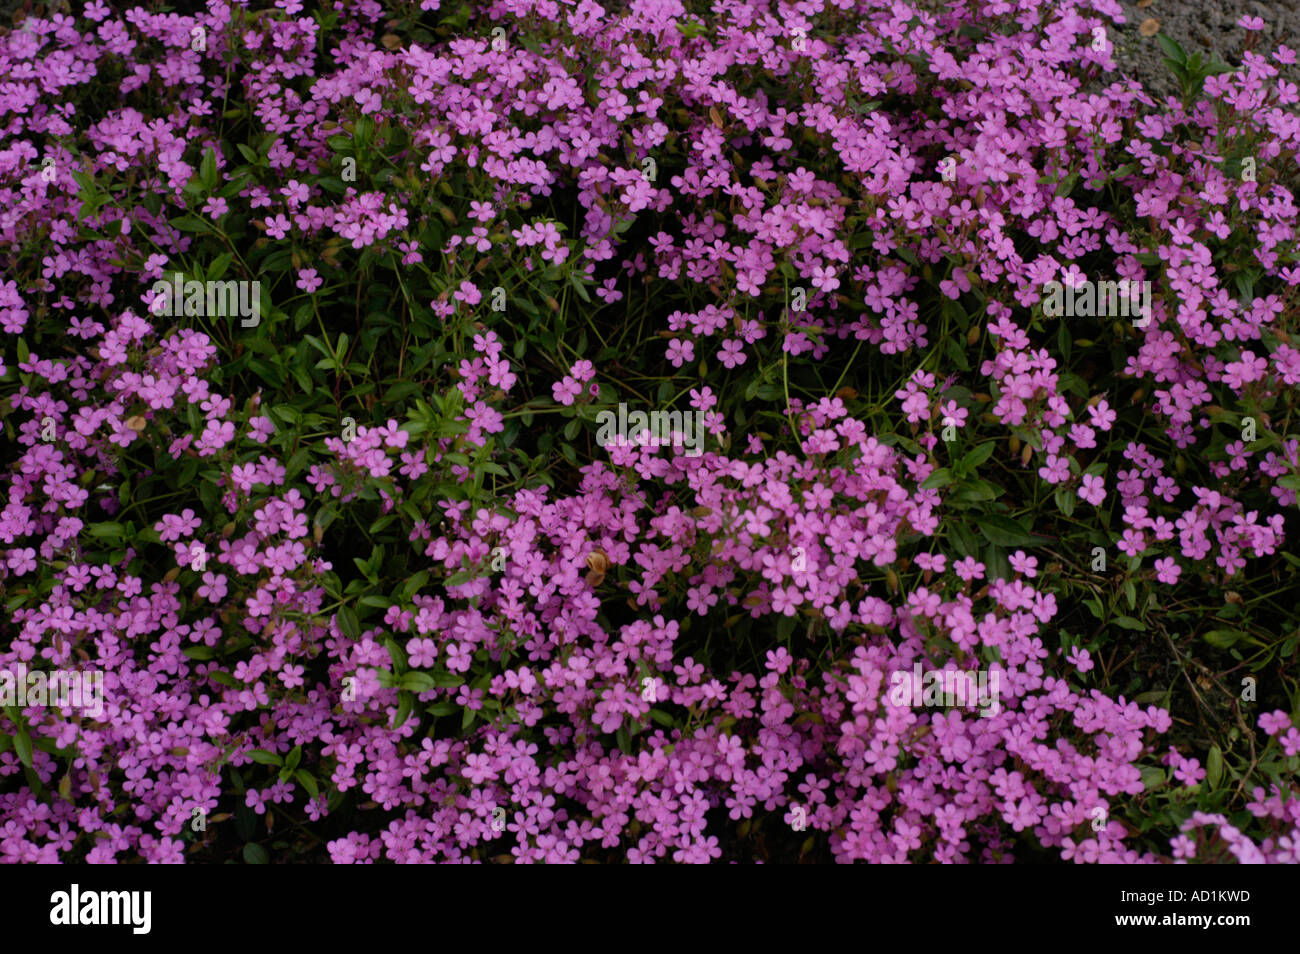 Carpet of small violet flowers Rock soapwort Caryophyllaceae Saponaria ocymoides Europe Stock Photo